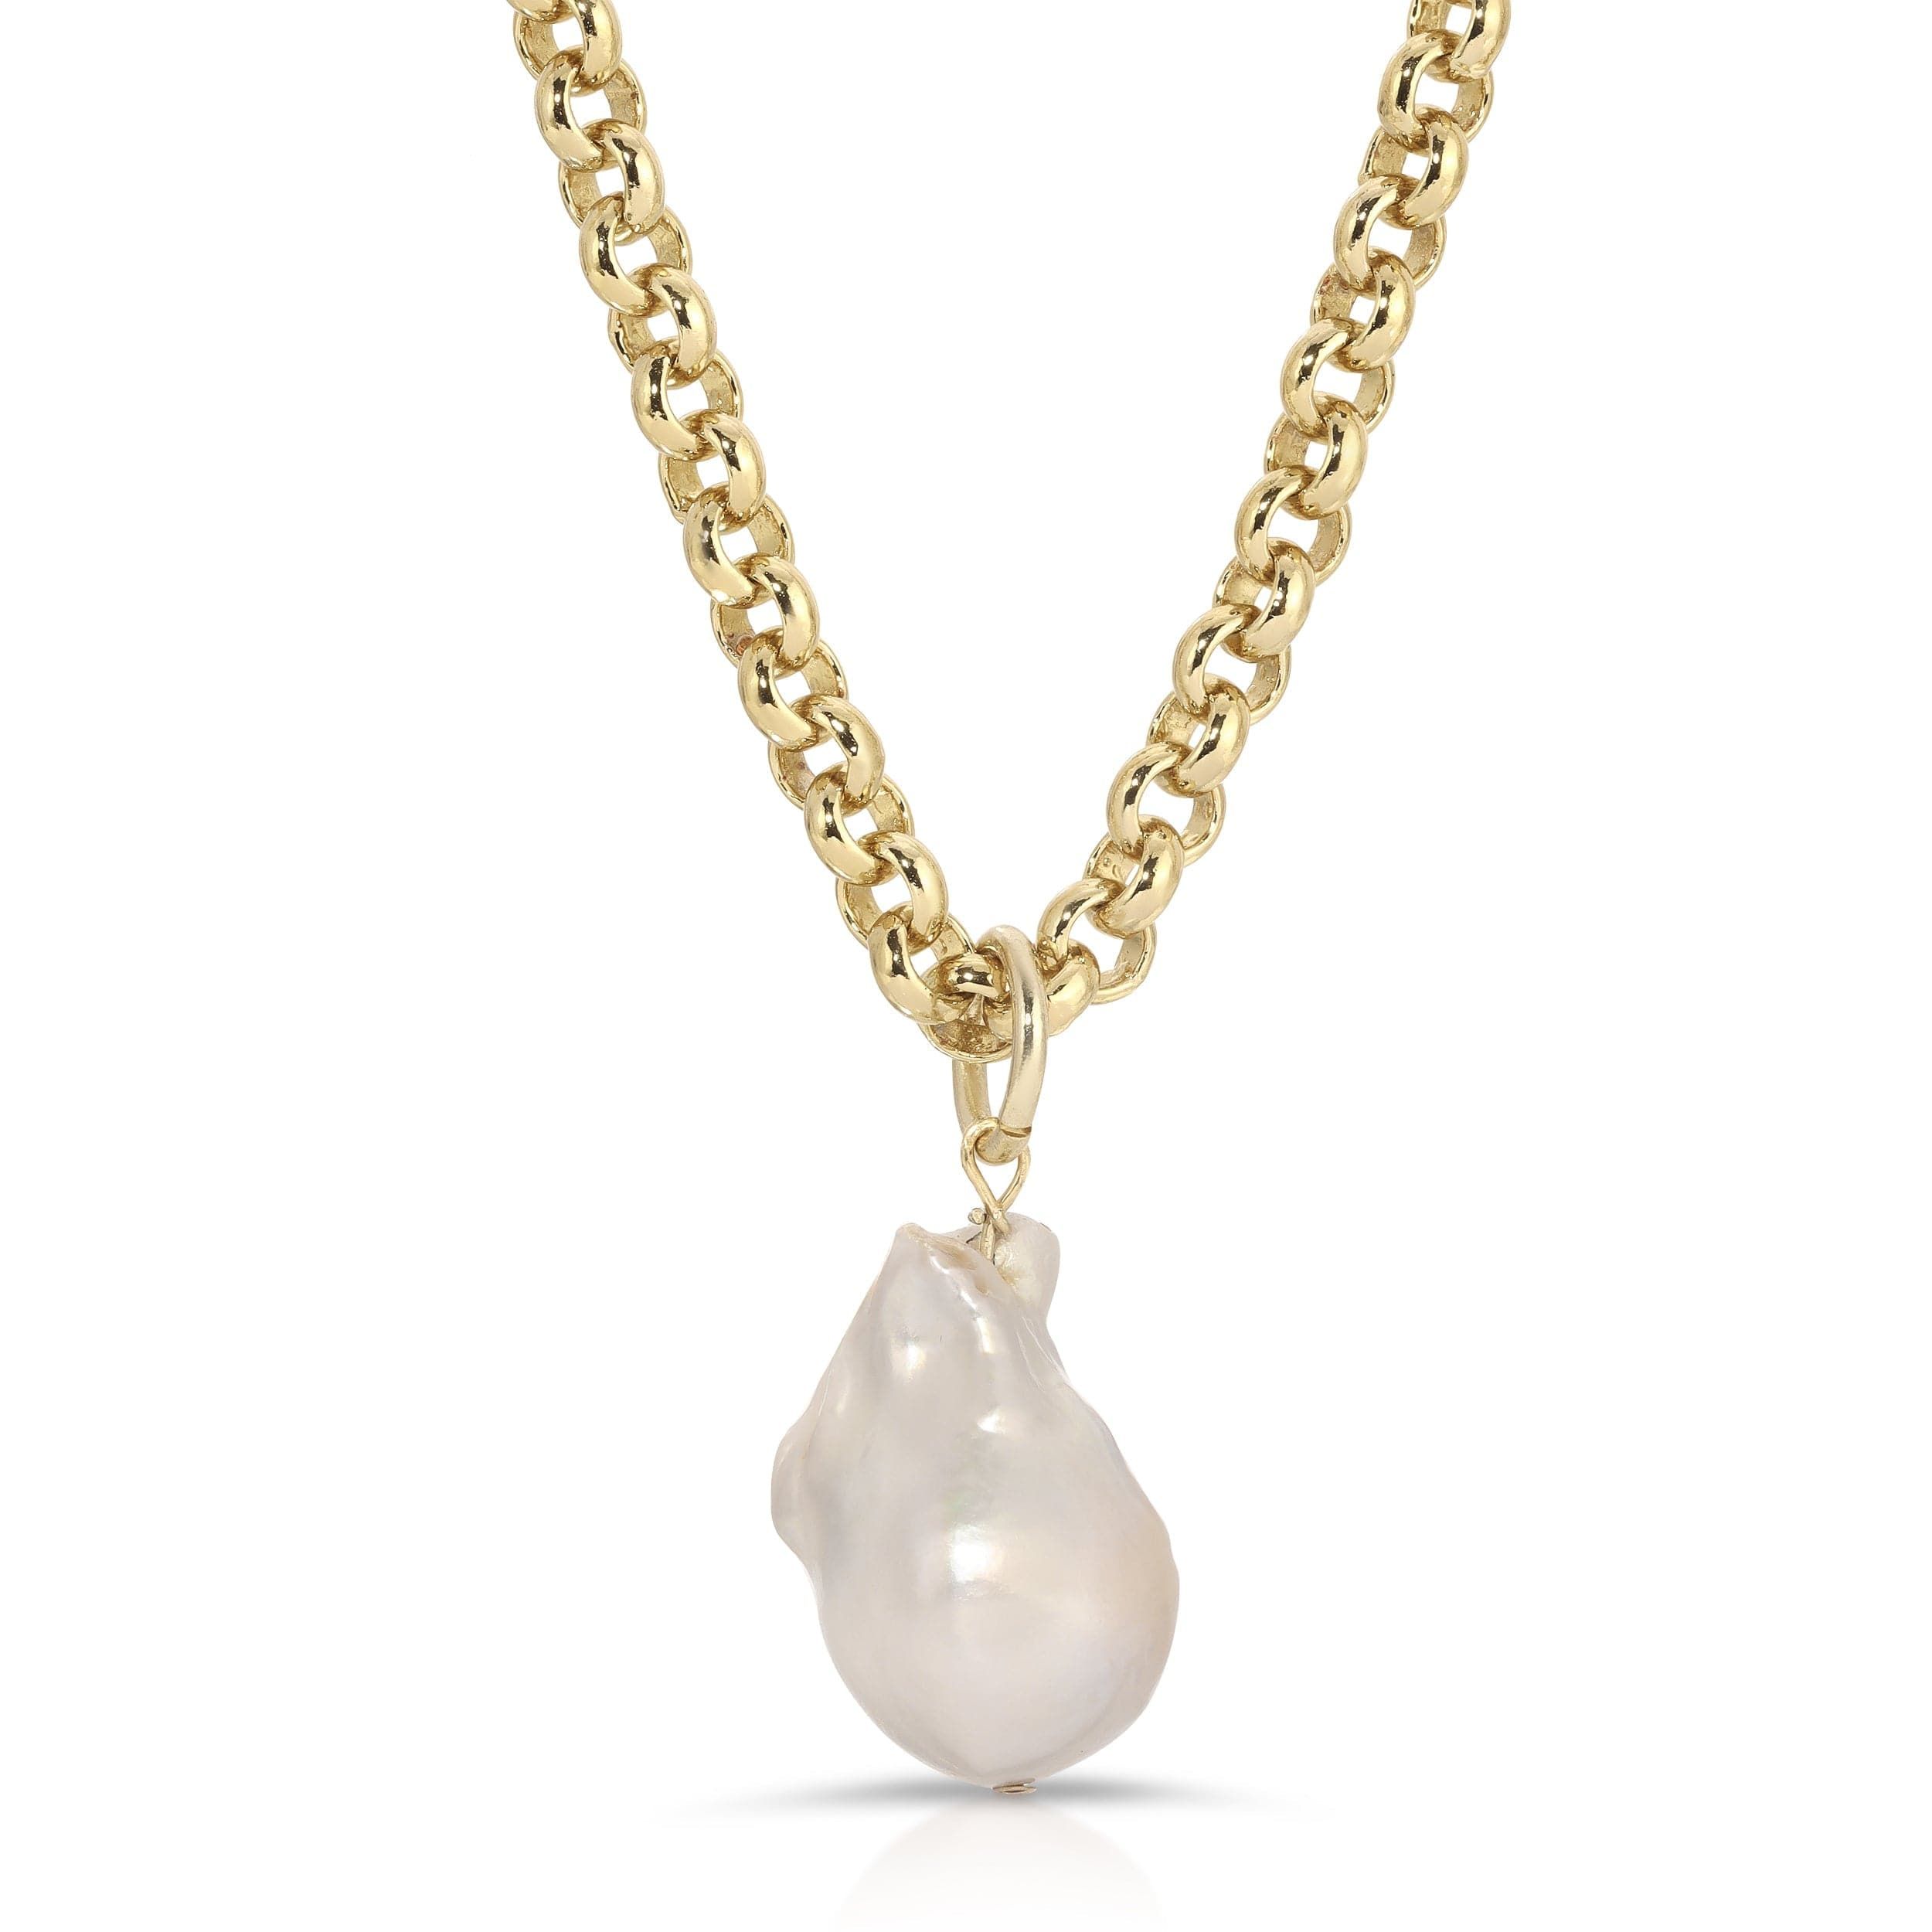 a necklace with a large white pearl hanging from it